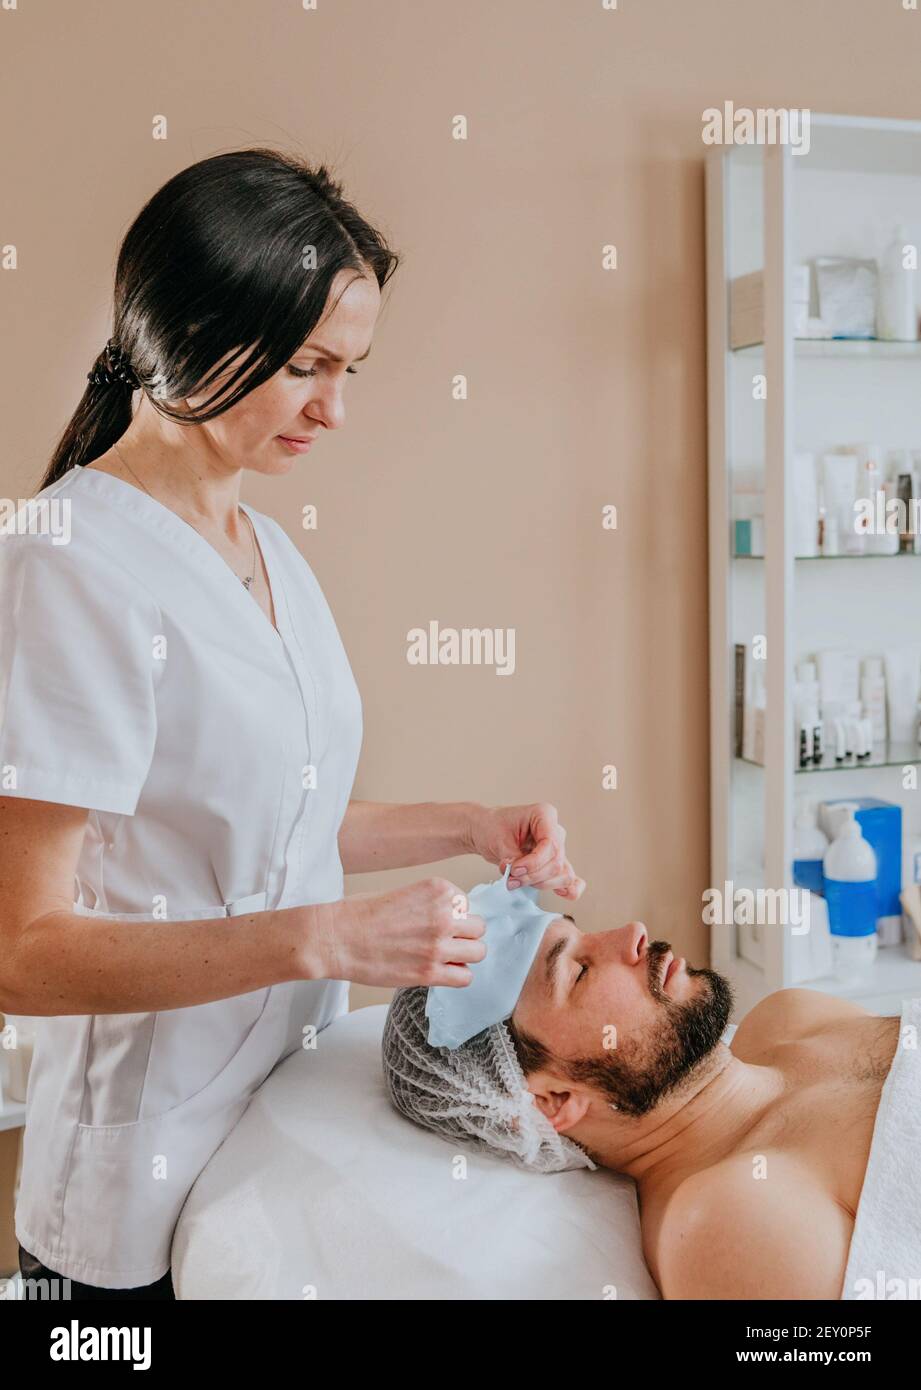 Esthetician making facial cleansing procedure using algae mask for a man Stock Photo